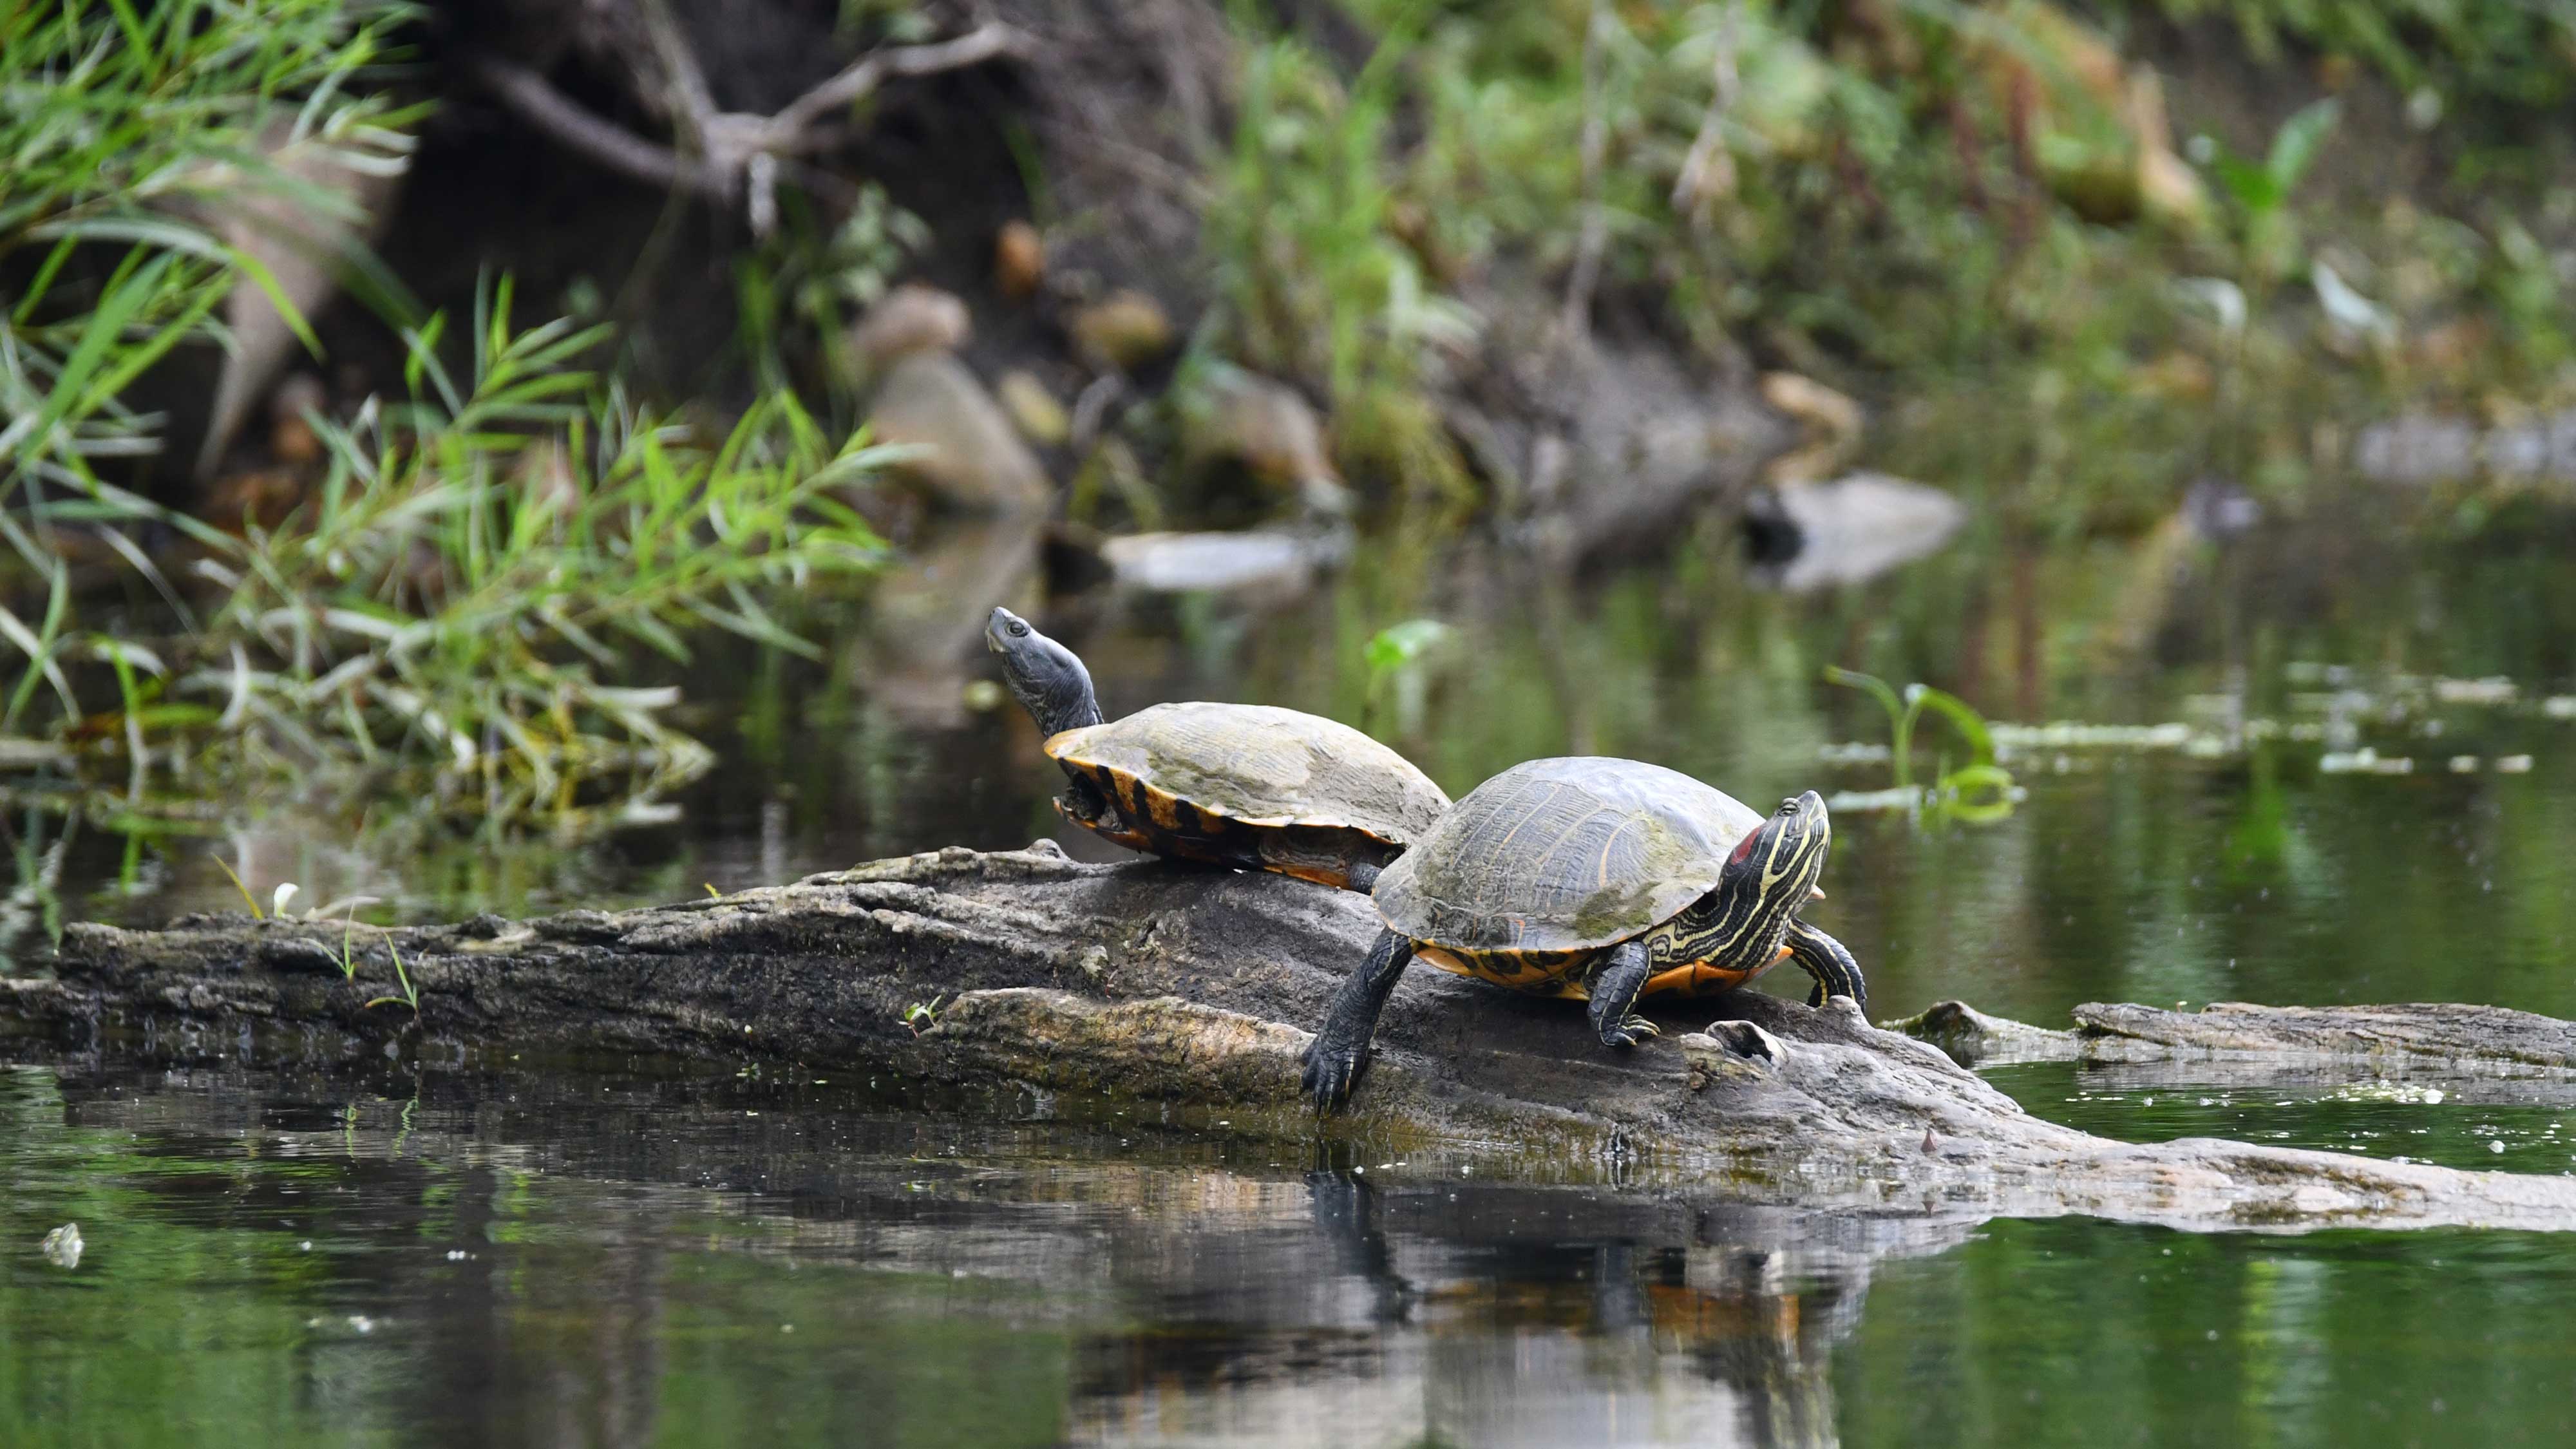 Two painted turtles on a log.